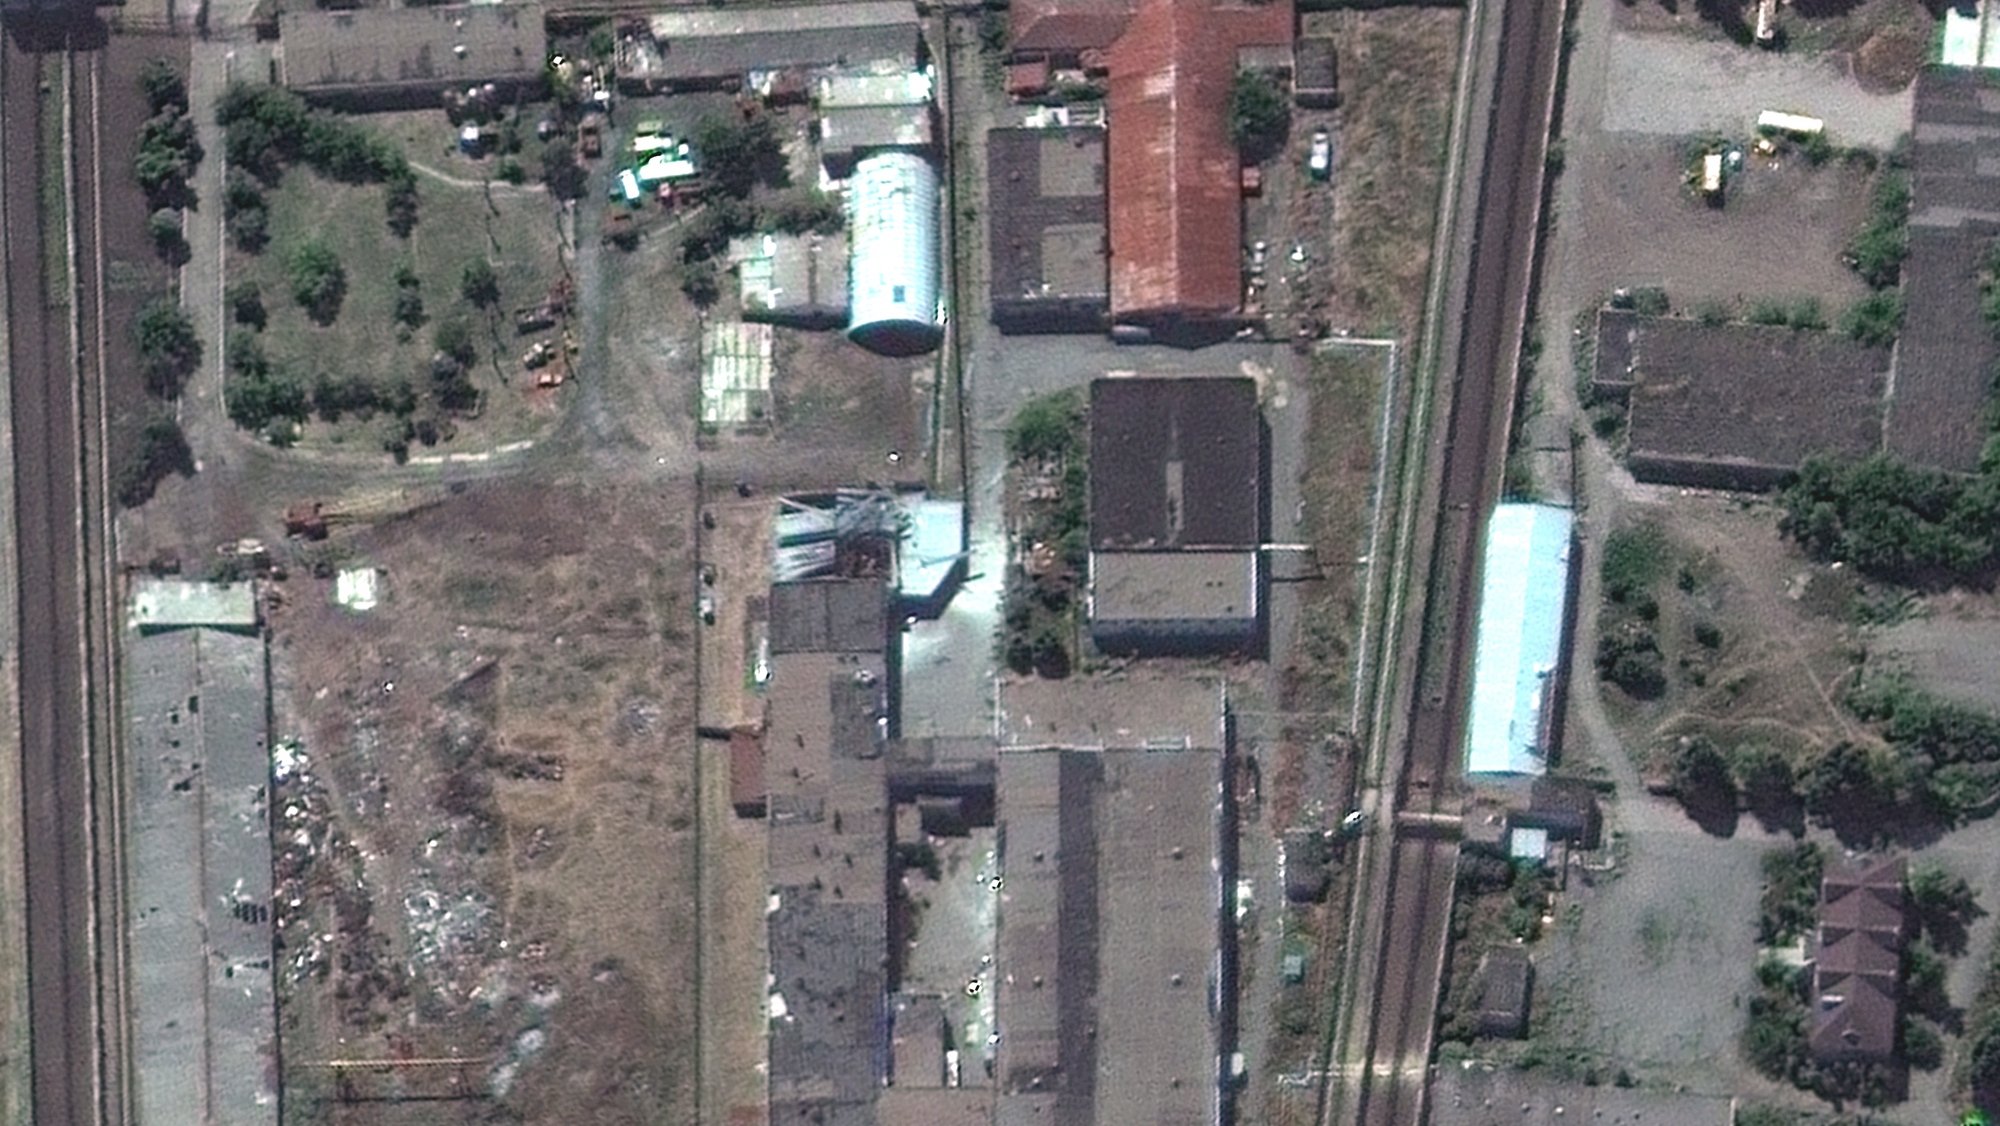 epa10099593 A handout satellite image made available by Maxar Technologies shows the Olenivka prison in the Donetsk region of Ukraine where more than 50 people reportedly died following an attack and explosion at the prison early on 29 July (issued 31 July 2022). Russian officials said that 53 Ukrainian POWs were killed in the attack on the compound located in the DPR-controlled region, for which both Ukraine and Russia blame each other. Russian troops on 24 February entered Ukrainian territory, starting a conflict that has provoked destruction and a humanitarian crisis.  EPA/MAXAR TECHNOLOGIES HANDOUT -- MANDATORY CREDIT: SATELLITE IMAGE 2022 MAXAR TECHNOLOGIES -- THE WATERMARK MAY NOT BE REMOVED/CROPPED -- HANDOUT EDITORIAL USE ONLY/NO SALES